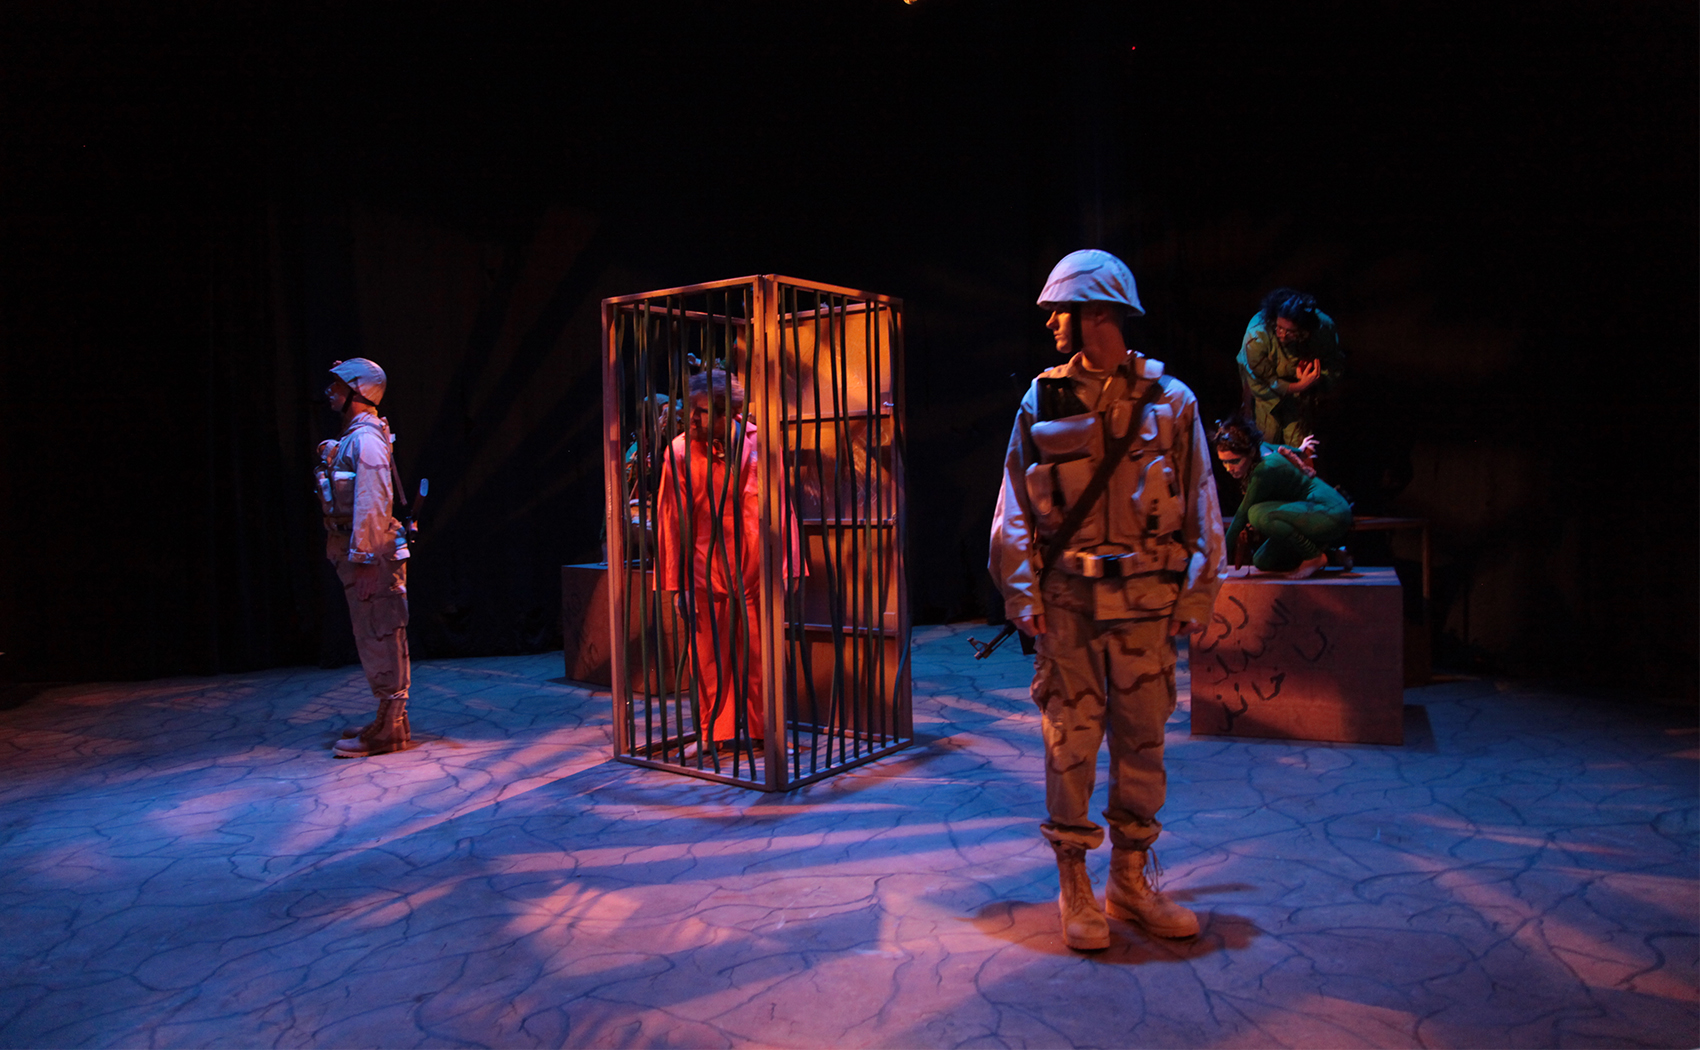 A man is hunched over, decked in an orange jumpsuit, looking scornfully. Several soldier guards stand watch around his cage, armored and geared. Some boxes with a foreign language scrawled across it are in the back, two people dressed in green crouch on them.  